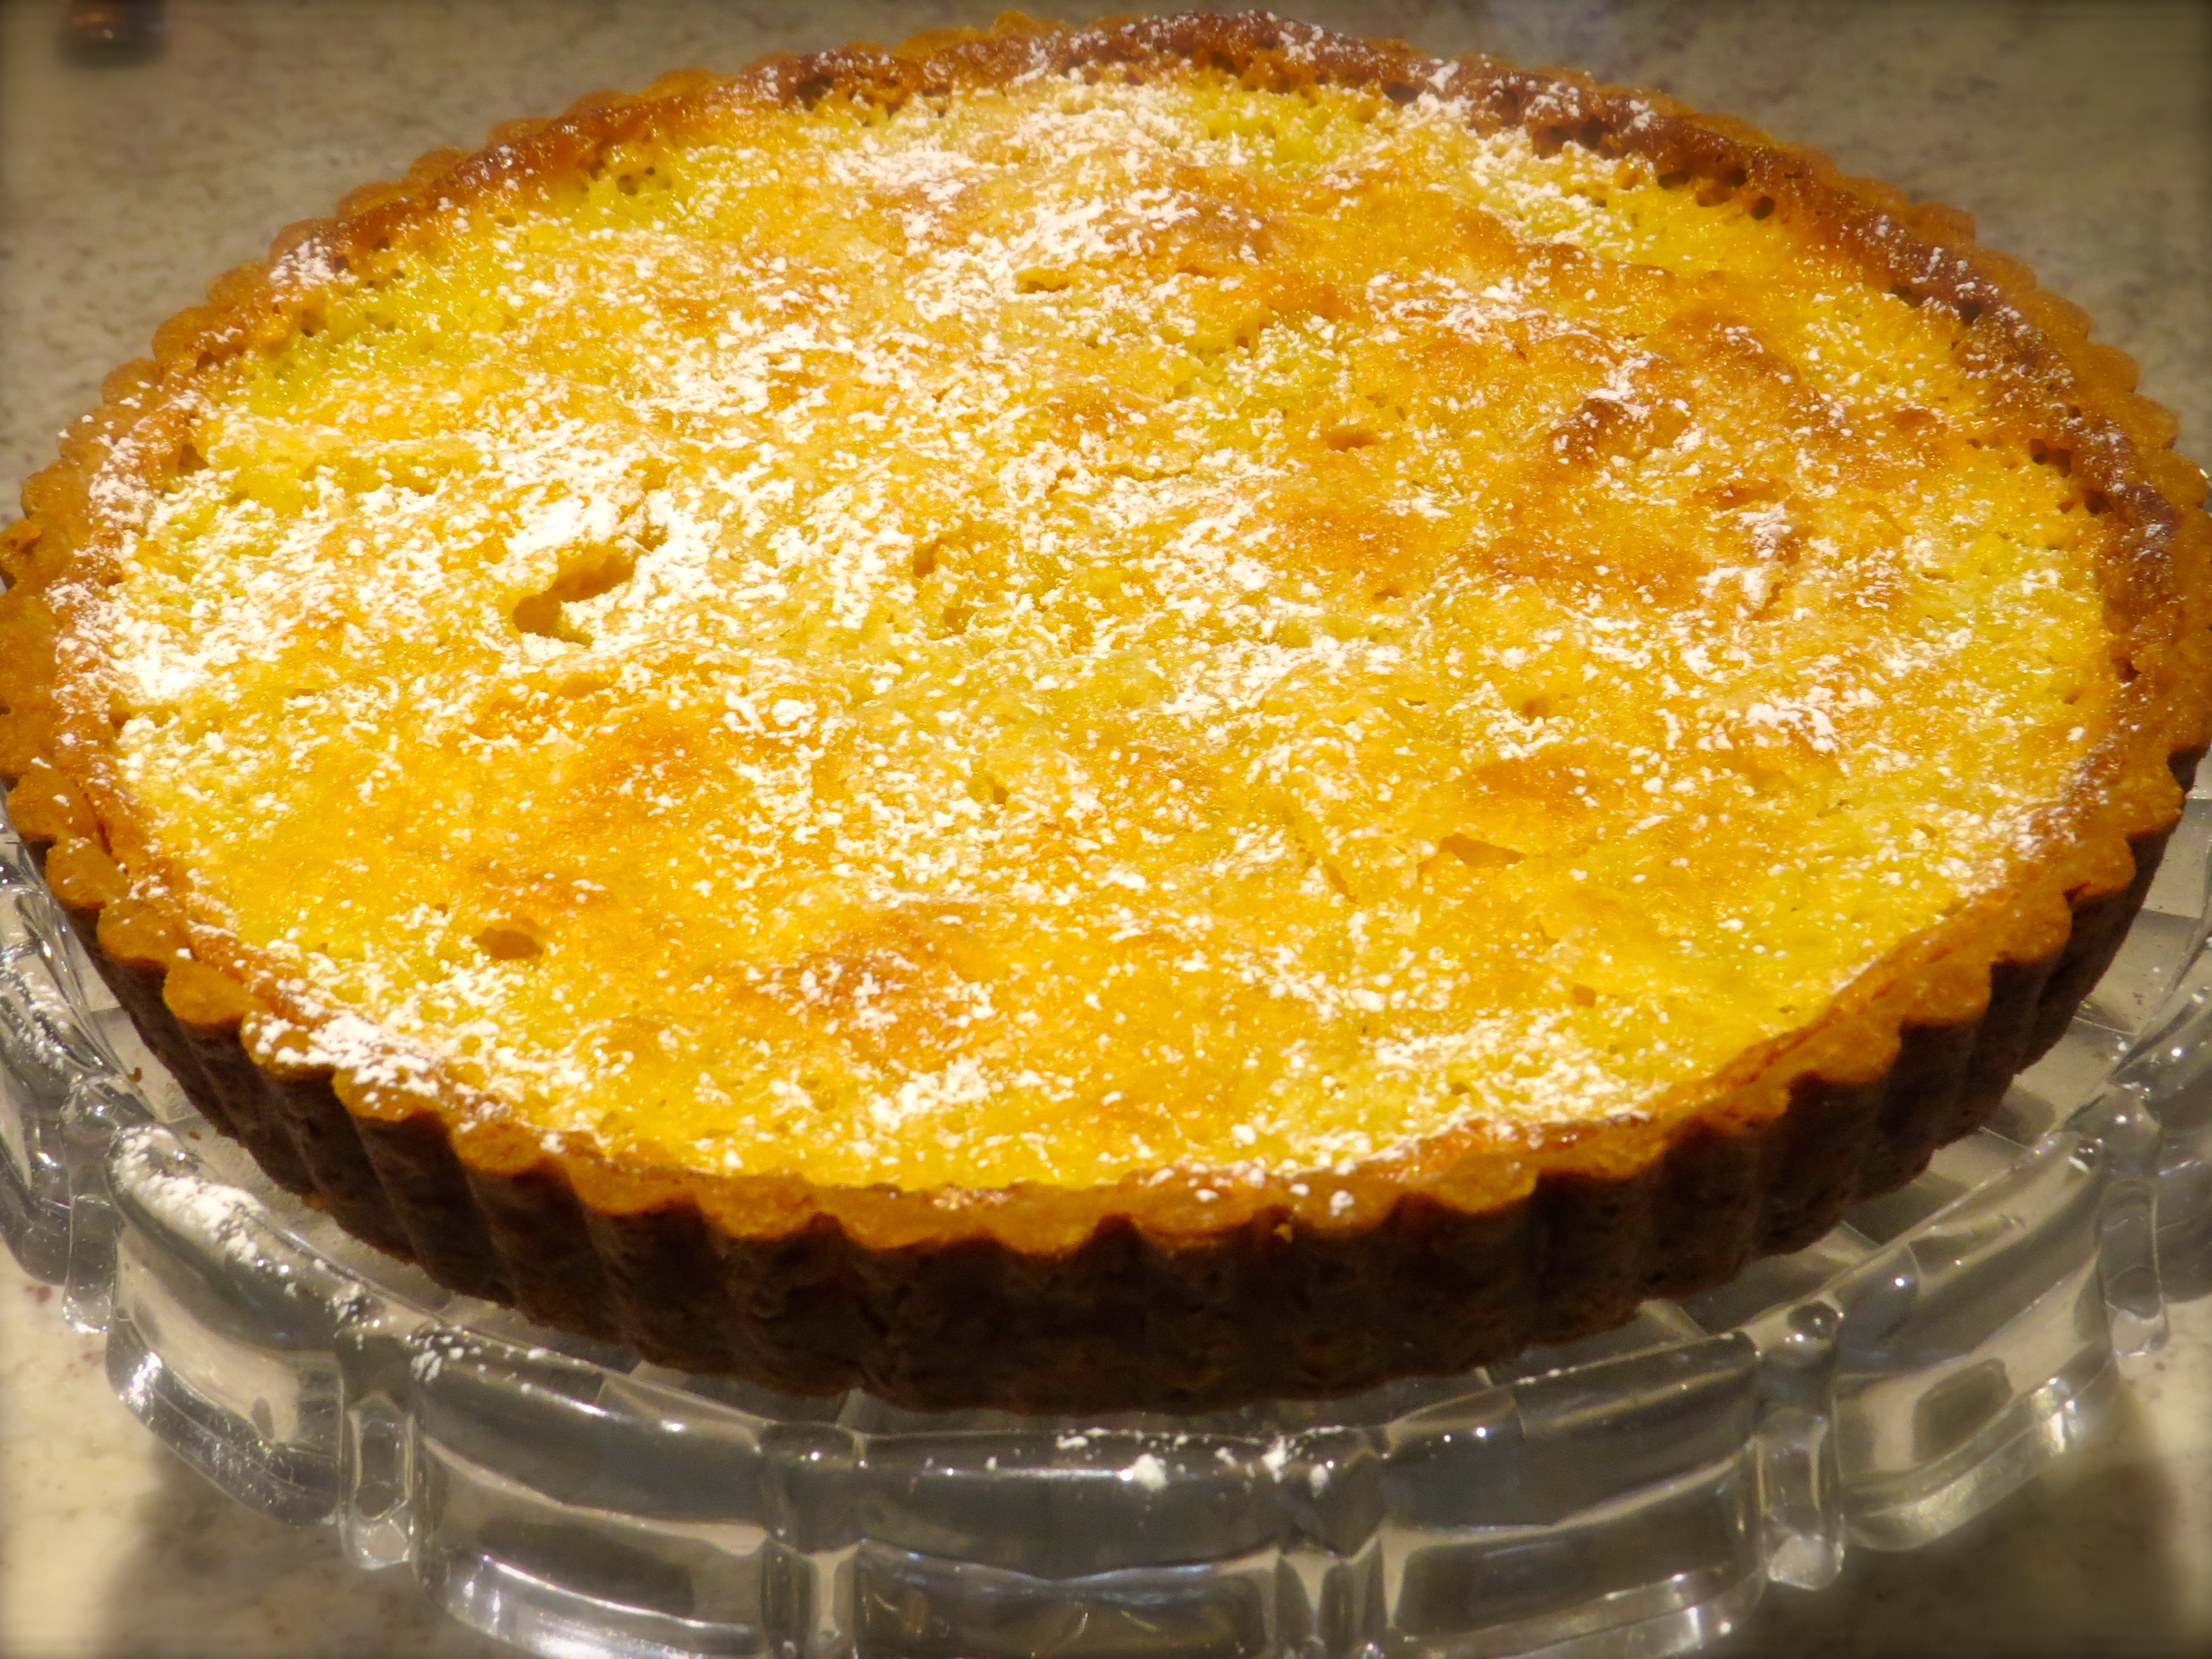 Orange-Almond Cream Tart, my French Firday's with Dorie recipe choice this week